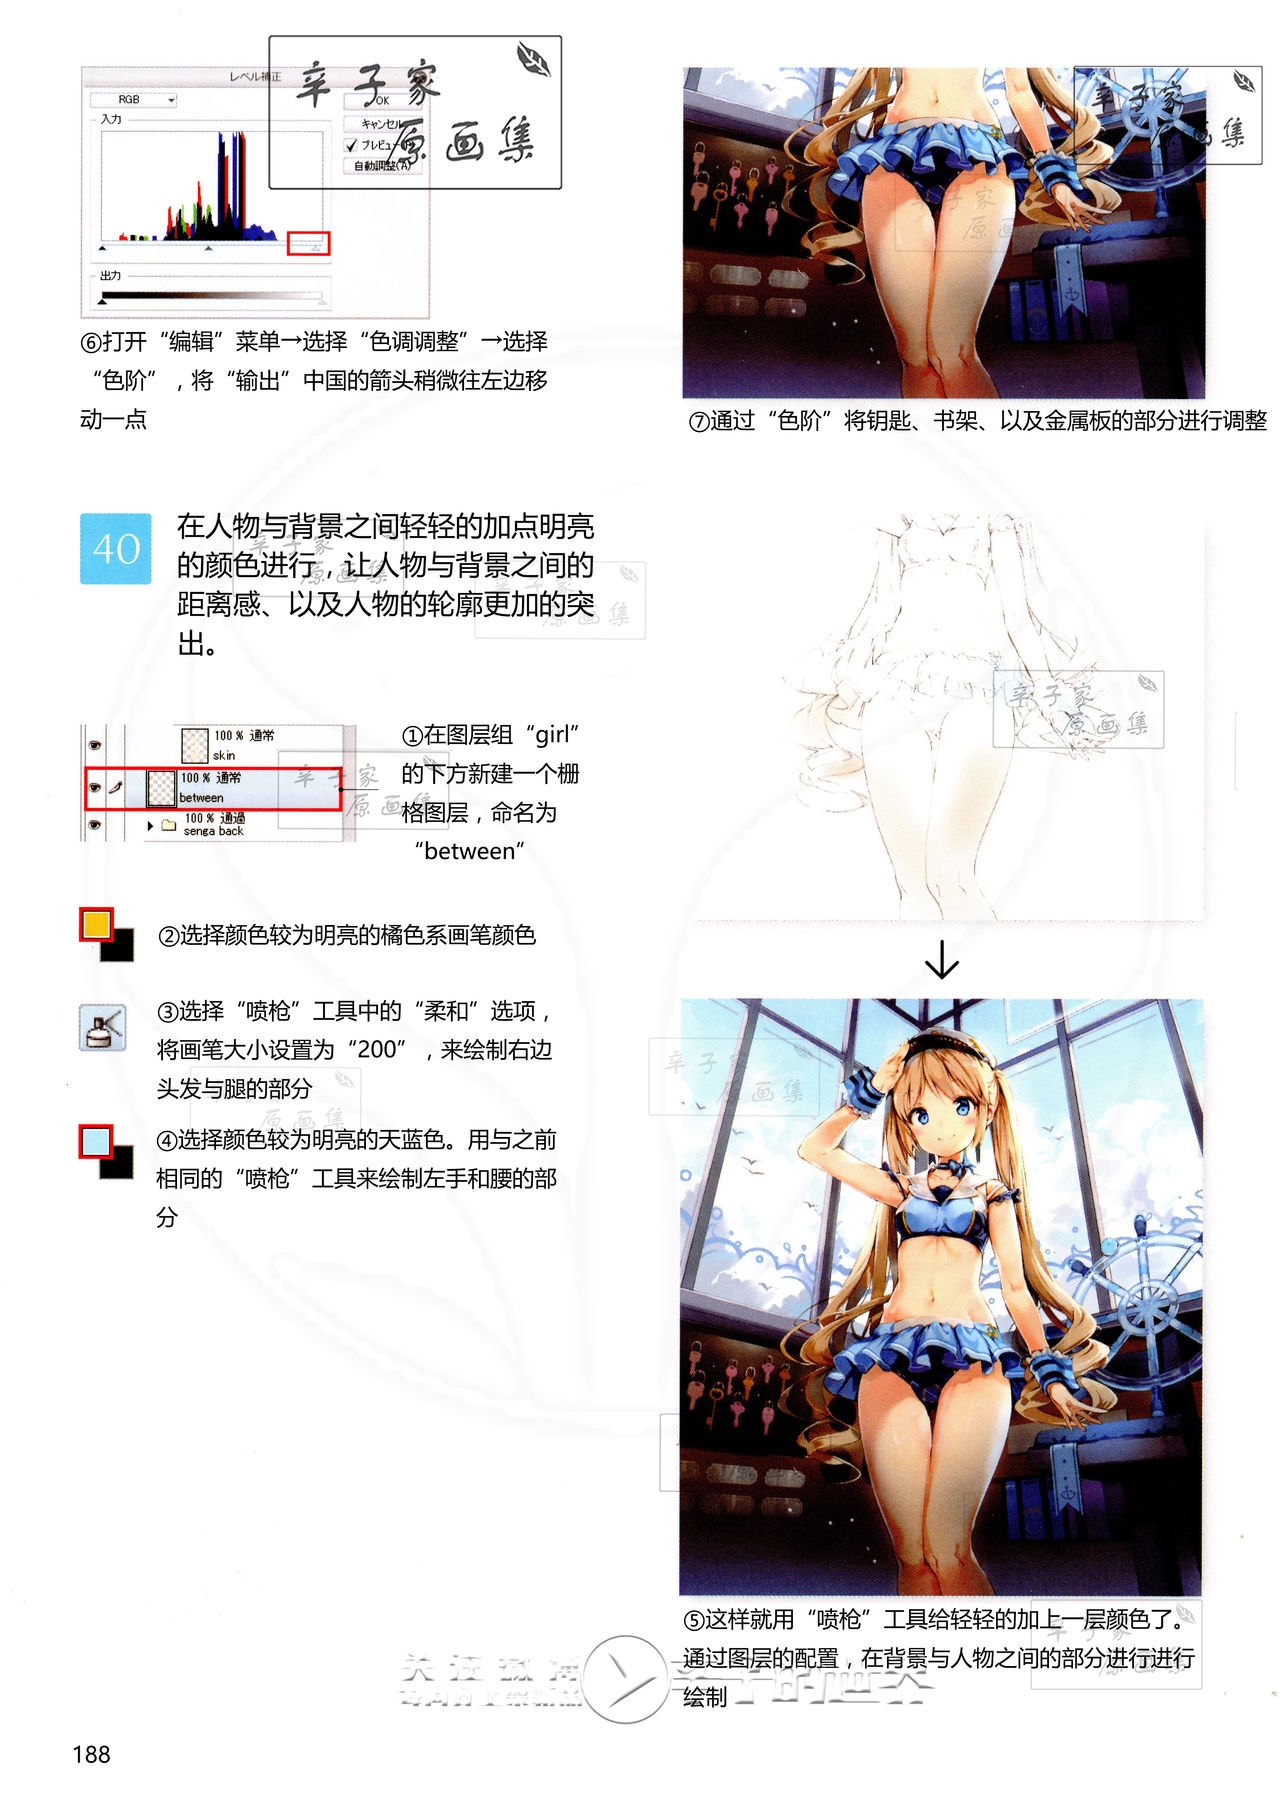 [Anmi] Lets Make ★ Character CG illustration techniques vol.9 [Chinese] 186